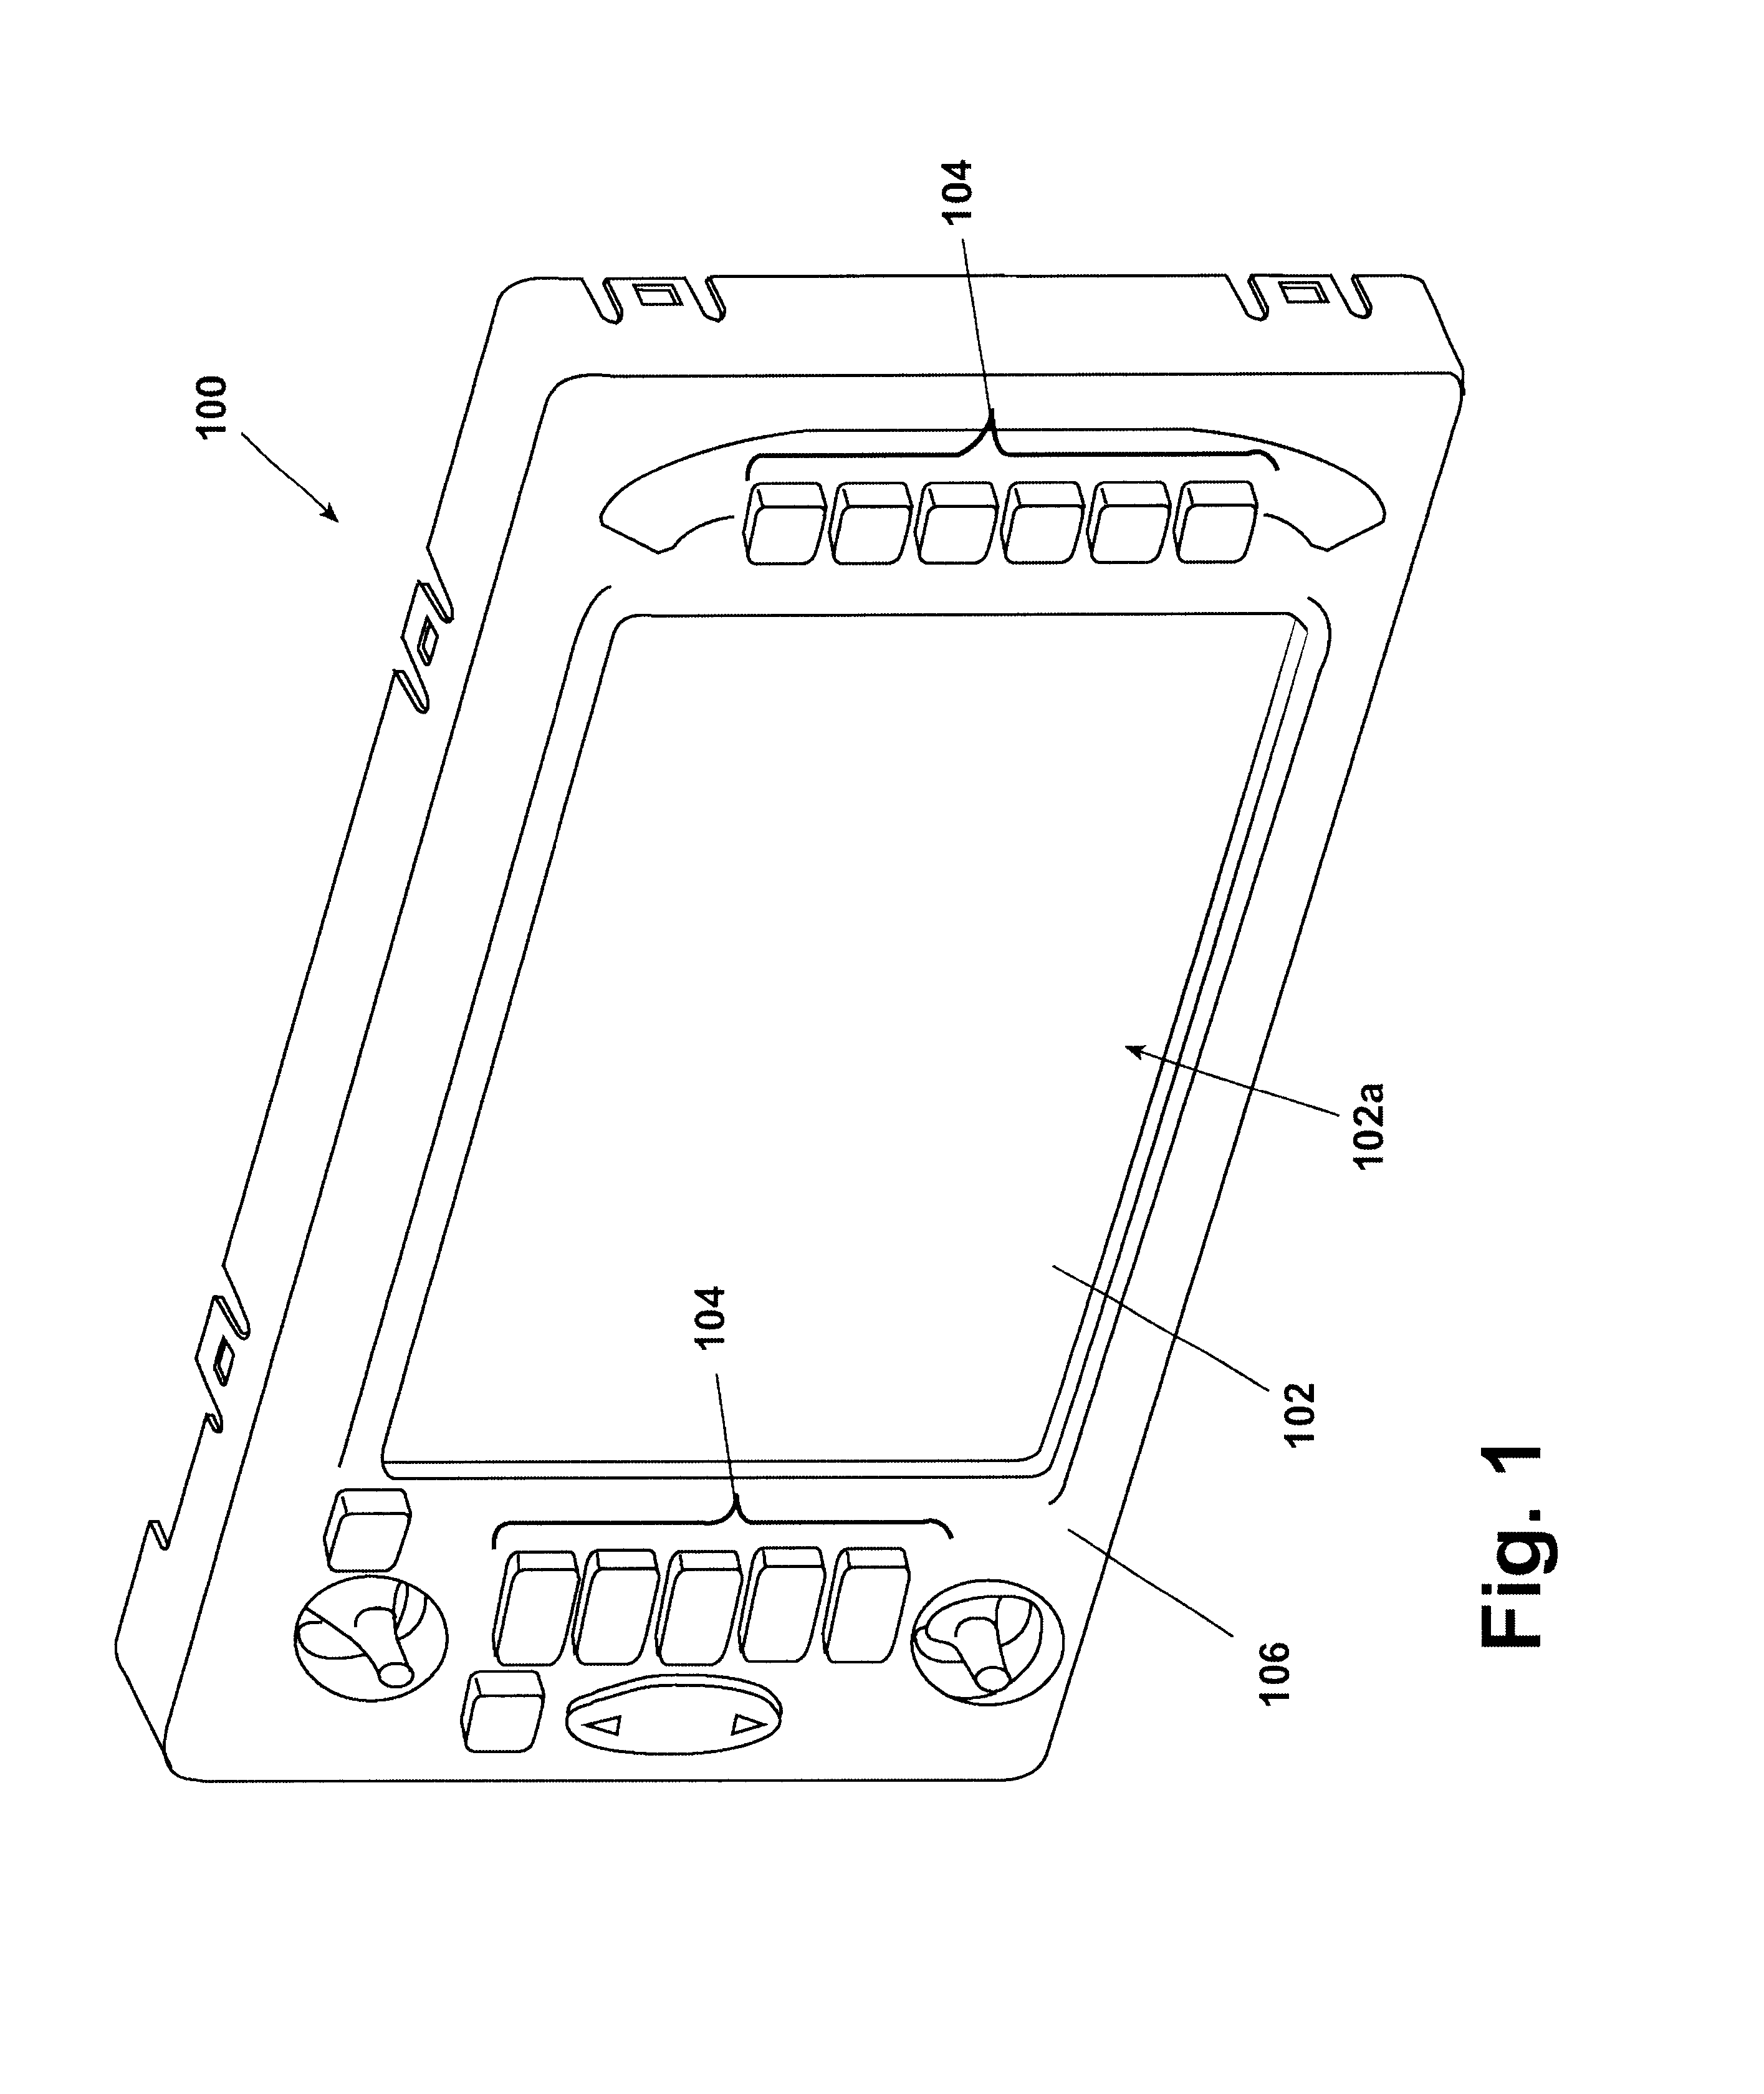 Integrated vehicle display lighting assembly